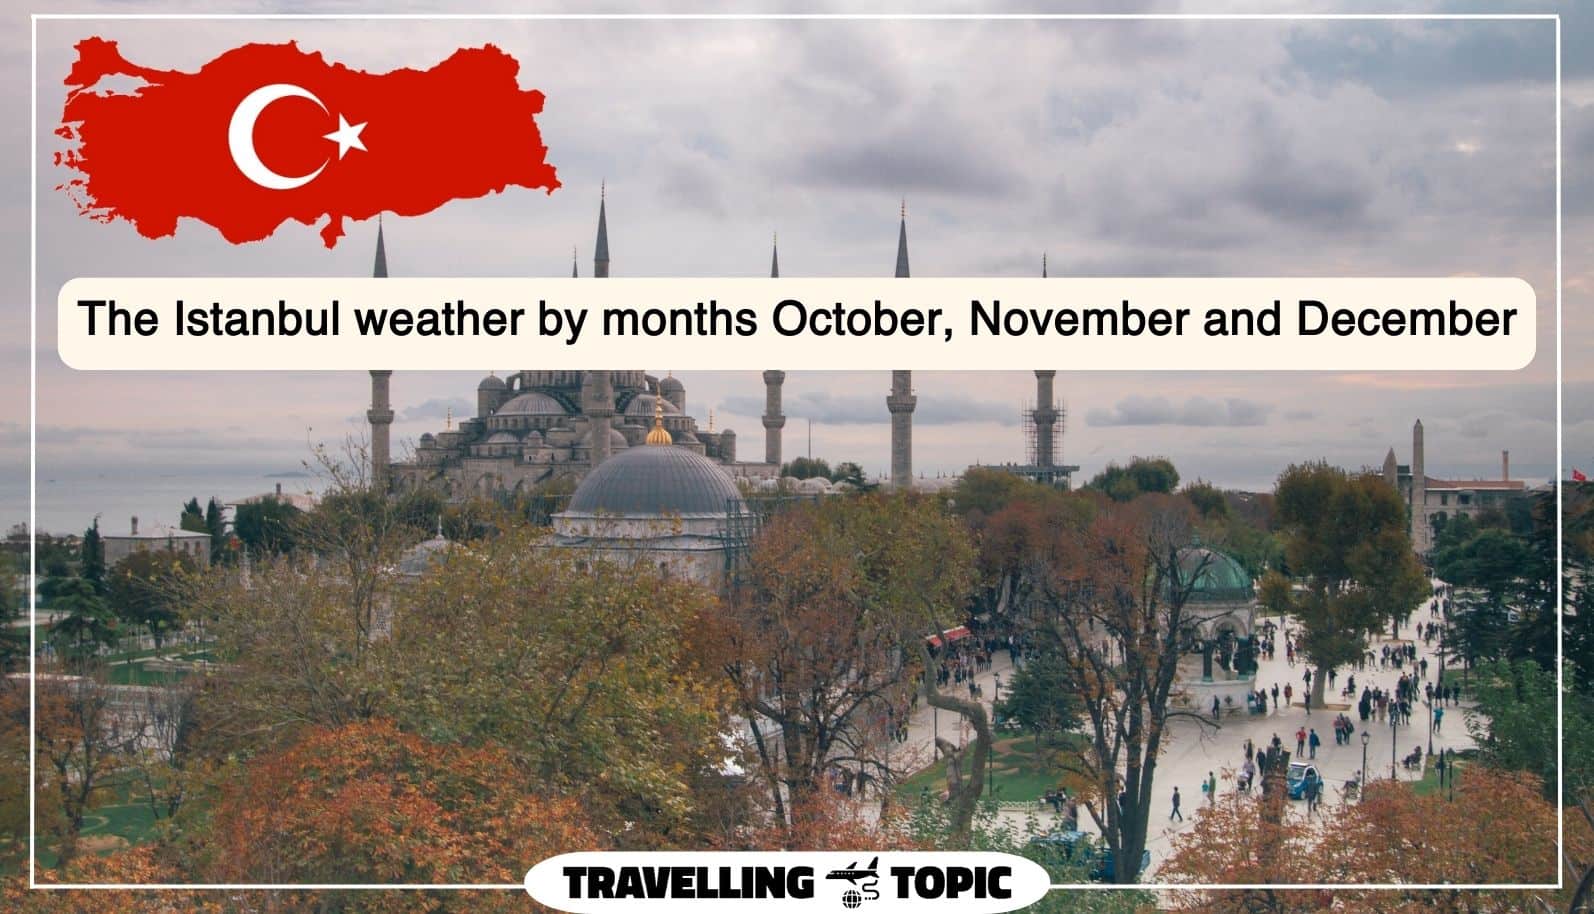 The Istanbul weather by months October, November and December